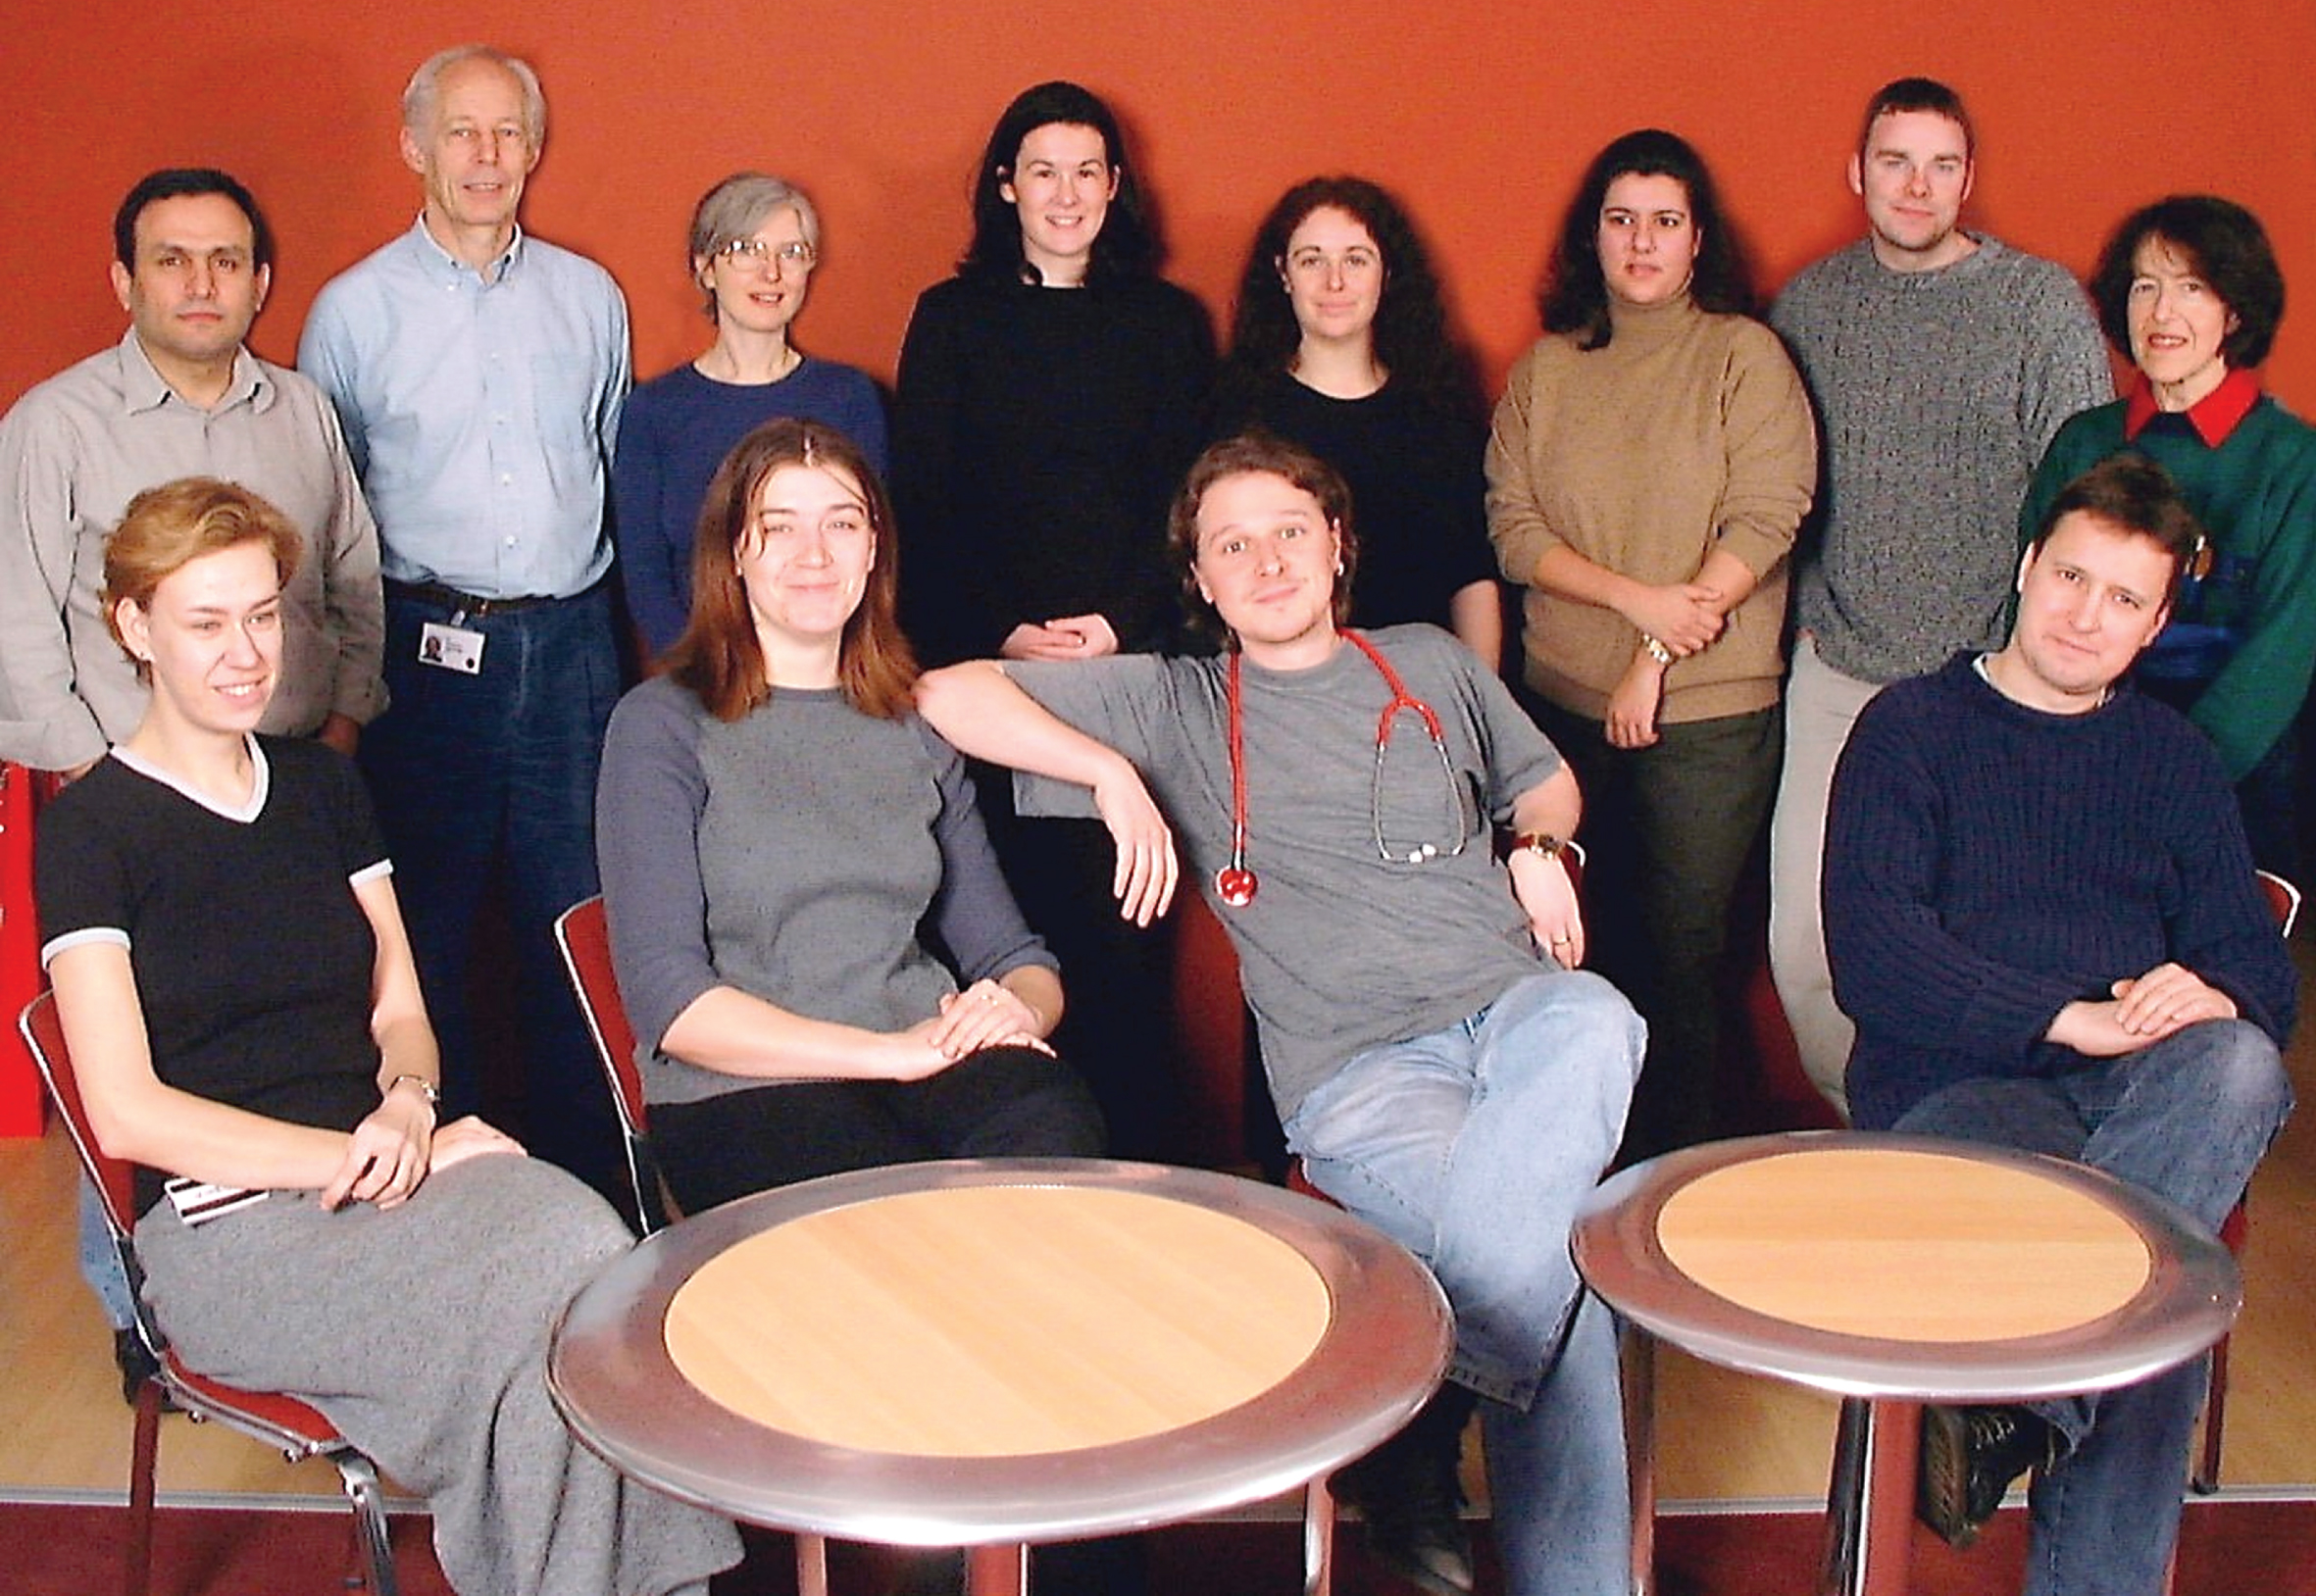 The silver jubilee. Picture of the Partridge lab around the turn of this century. From L to R the picture includes - Front row: Joanne Cousins, Sarah De Val, Pete Zammit, Jon Beauchamp. Back row: George Bou-Gharios, Terry Partridge, Jenny Morgan, Louise Heslop, TBN, Markella Ponticos, Jamie Morrison, Jacqueline Gross.